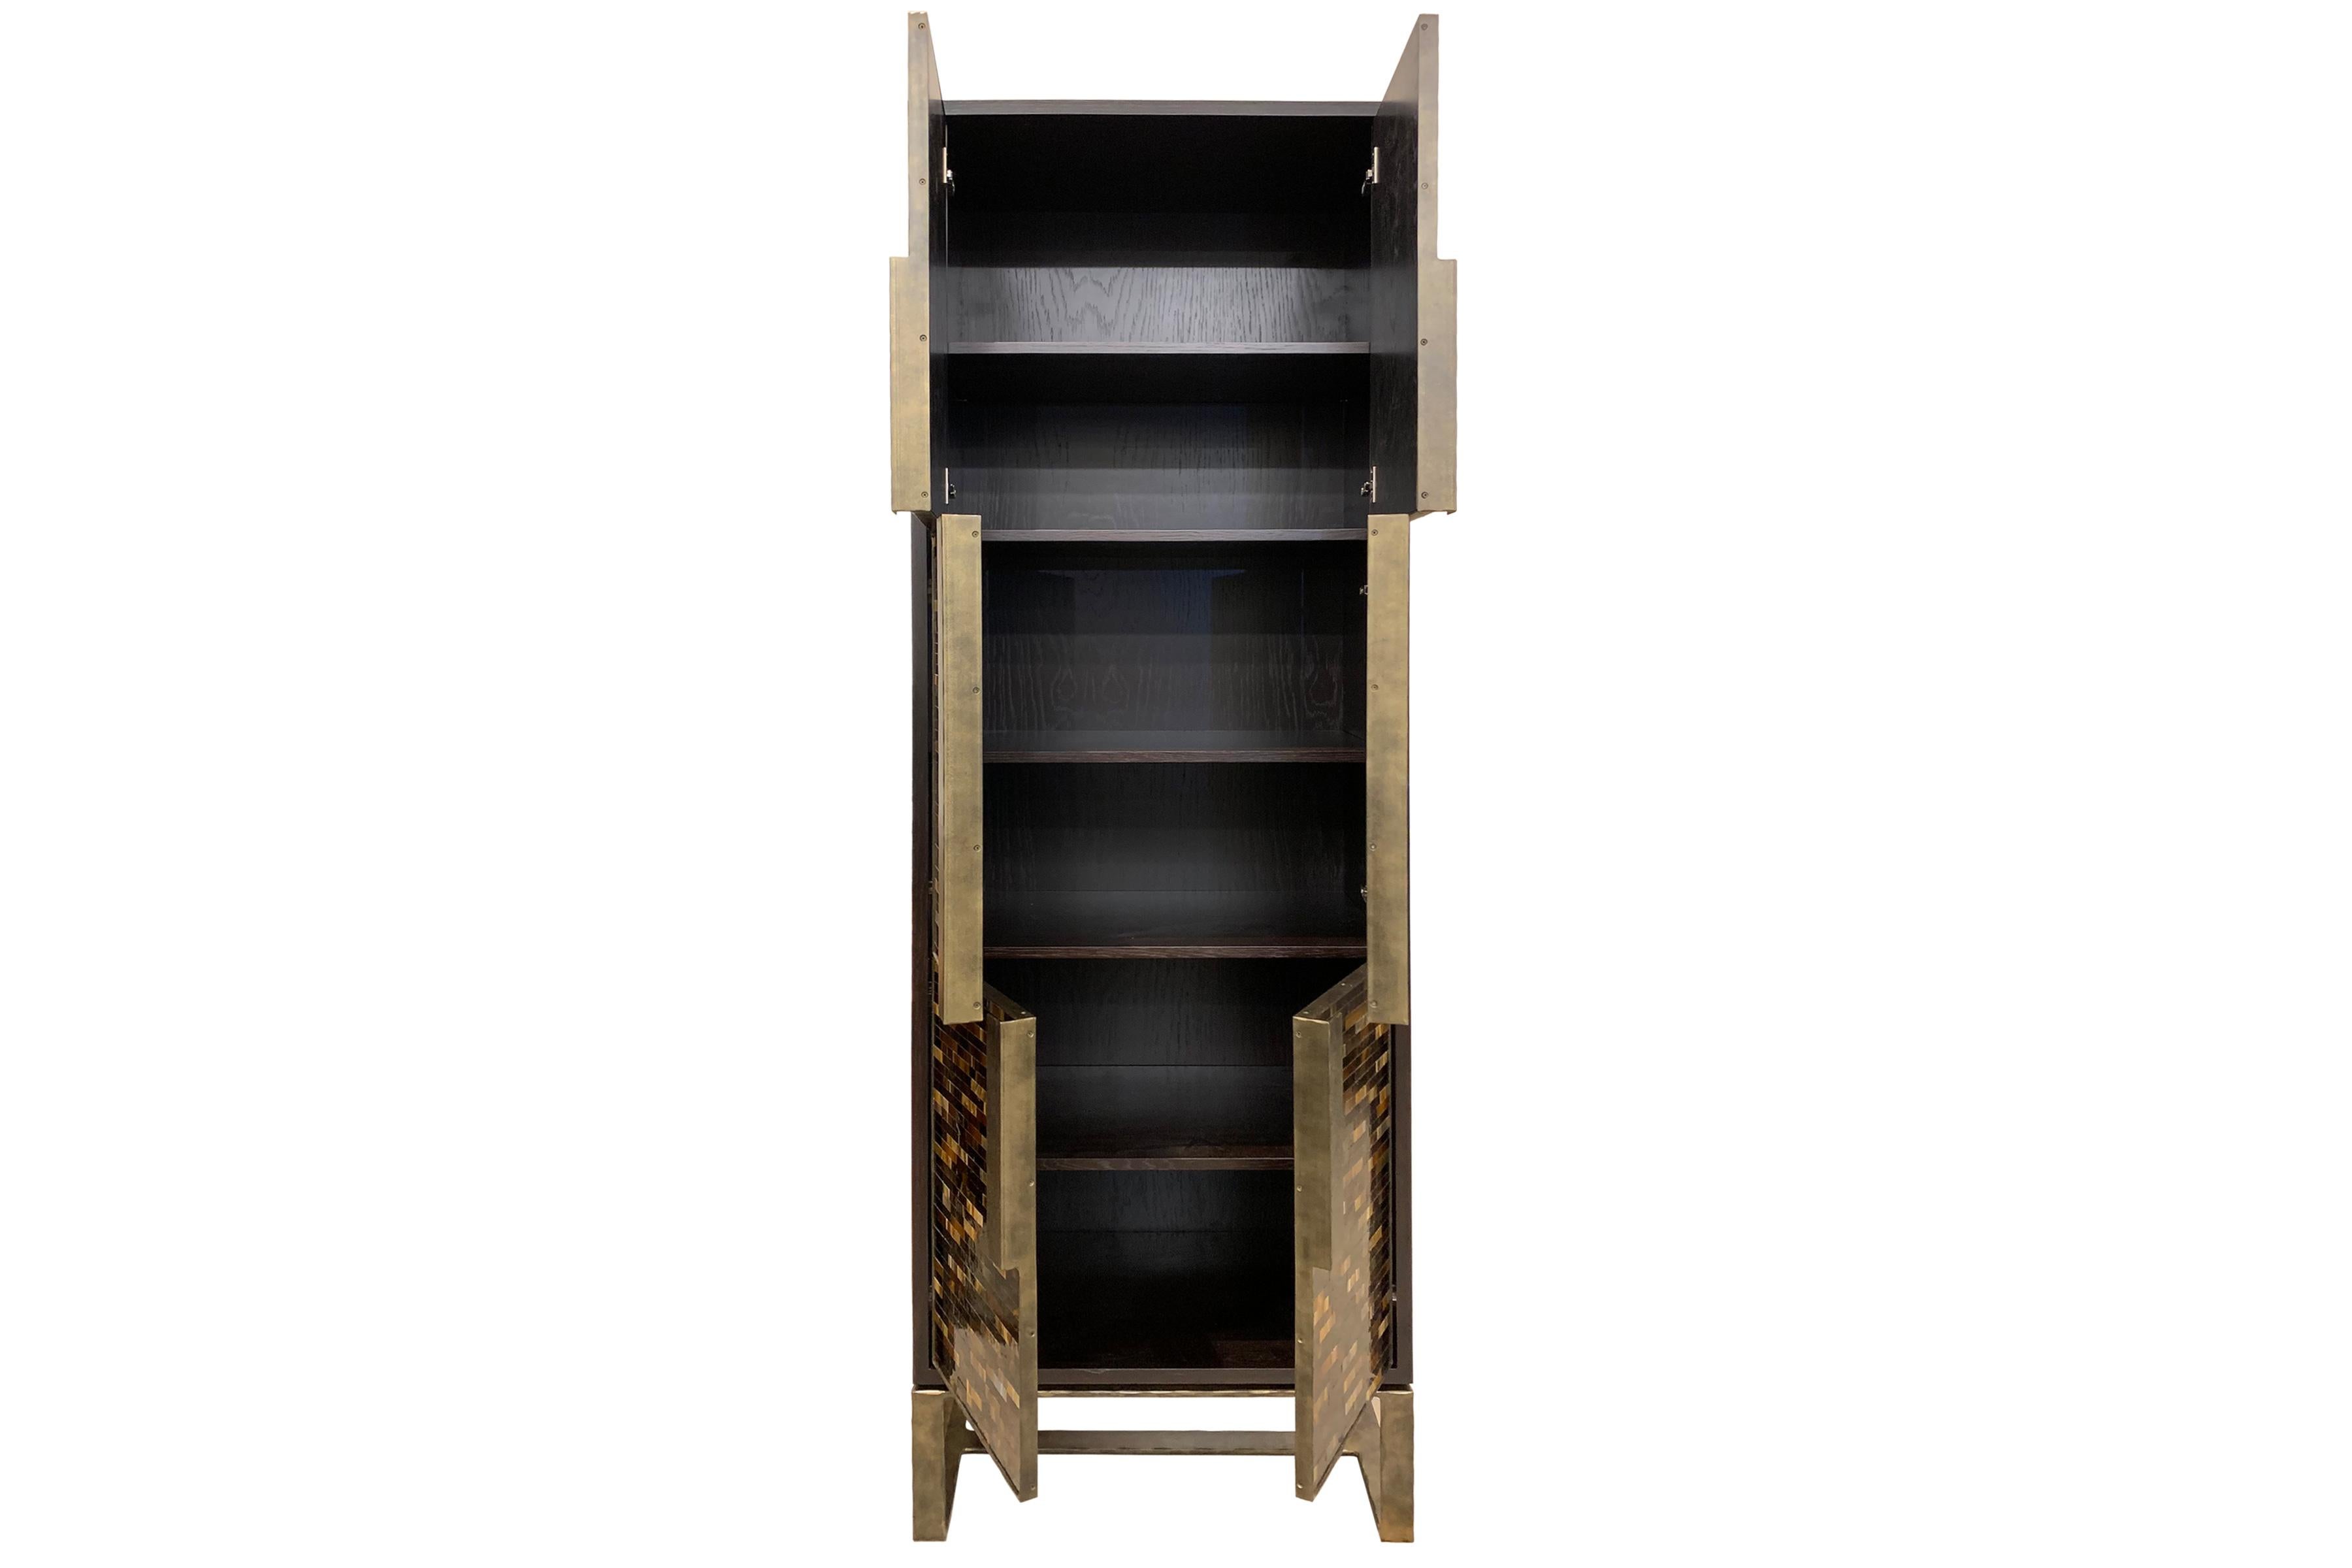 The Chelsea bar cabinet by Ercole Home has a 6-door front, with Espresso wood finish on oak.
Handcut glass mosaics in dark and medium chocolate decorate the surface in Luis pattern.
Hand-hammered metal framed doors, handles, and base in bronze